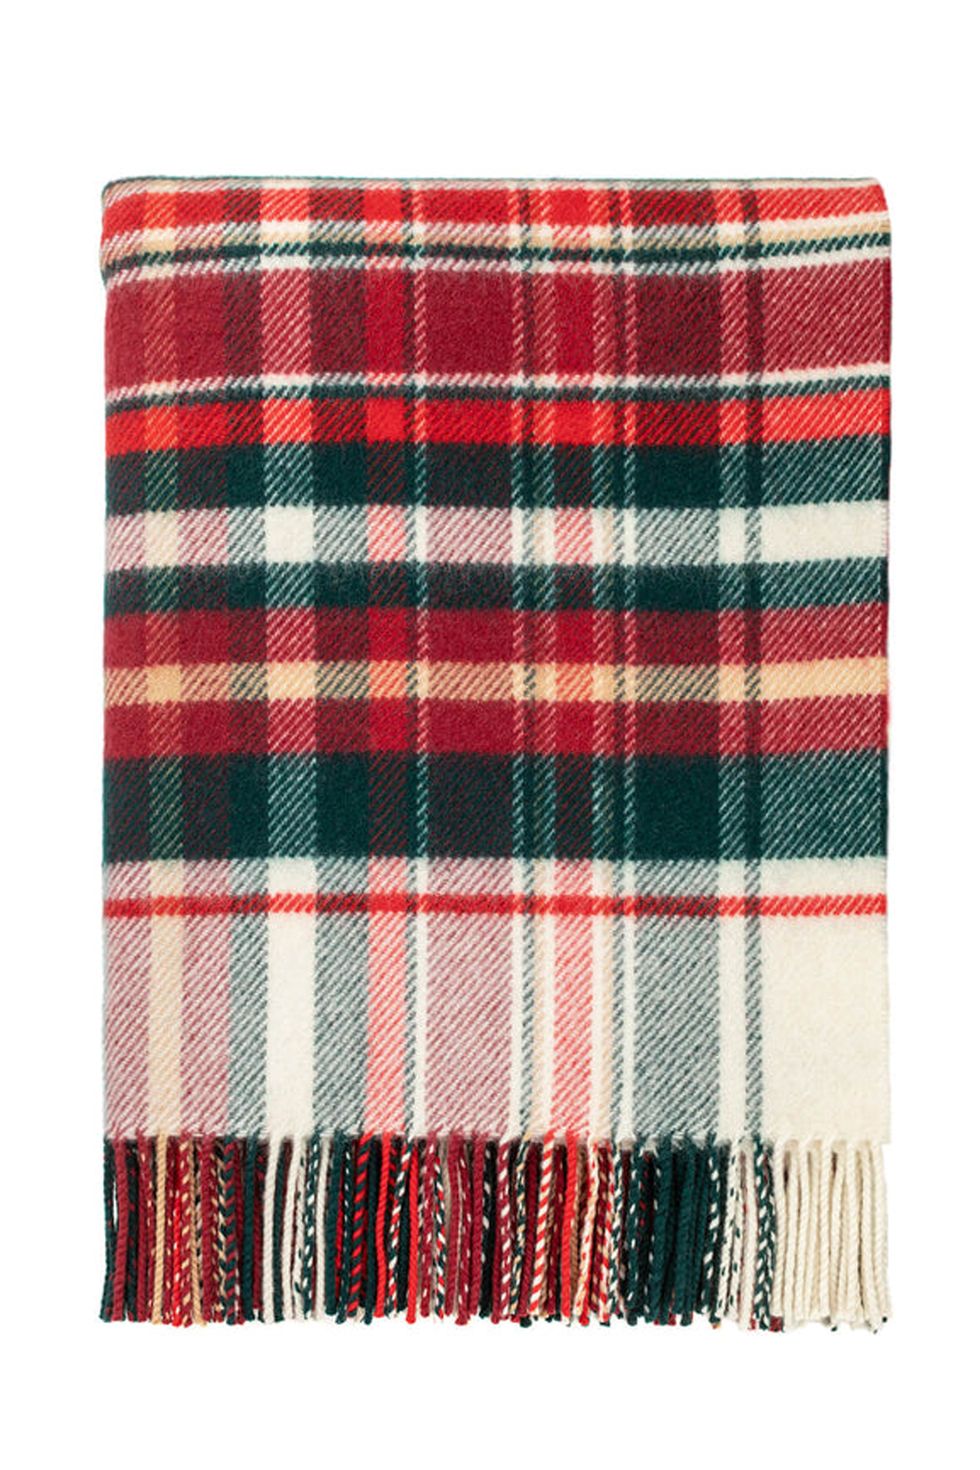 a red and green plaid blanket